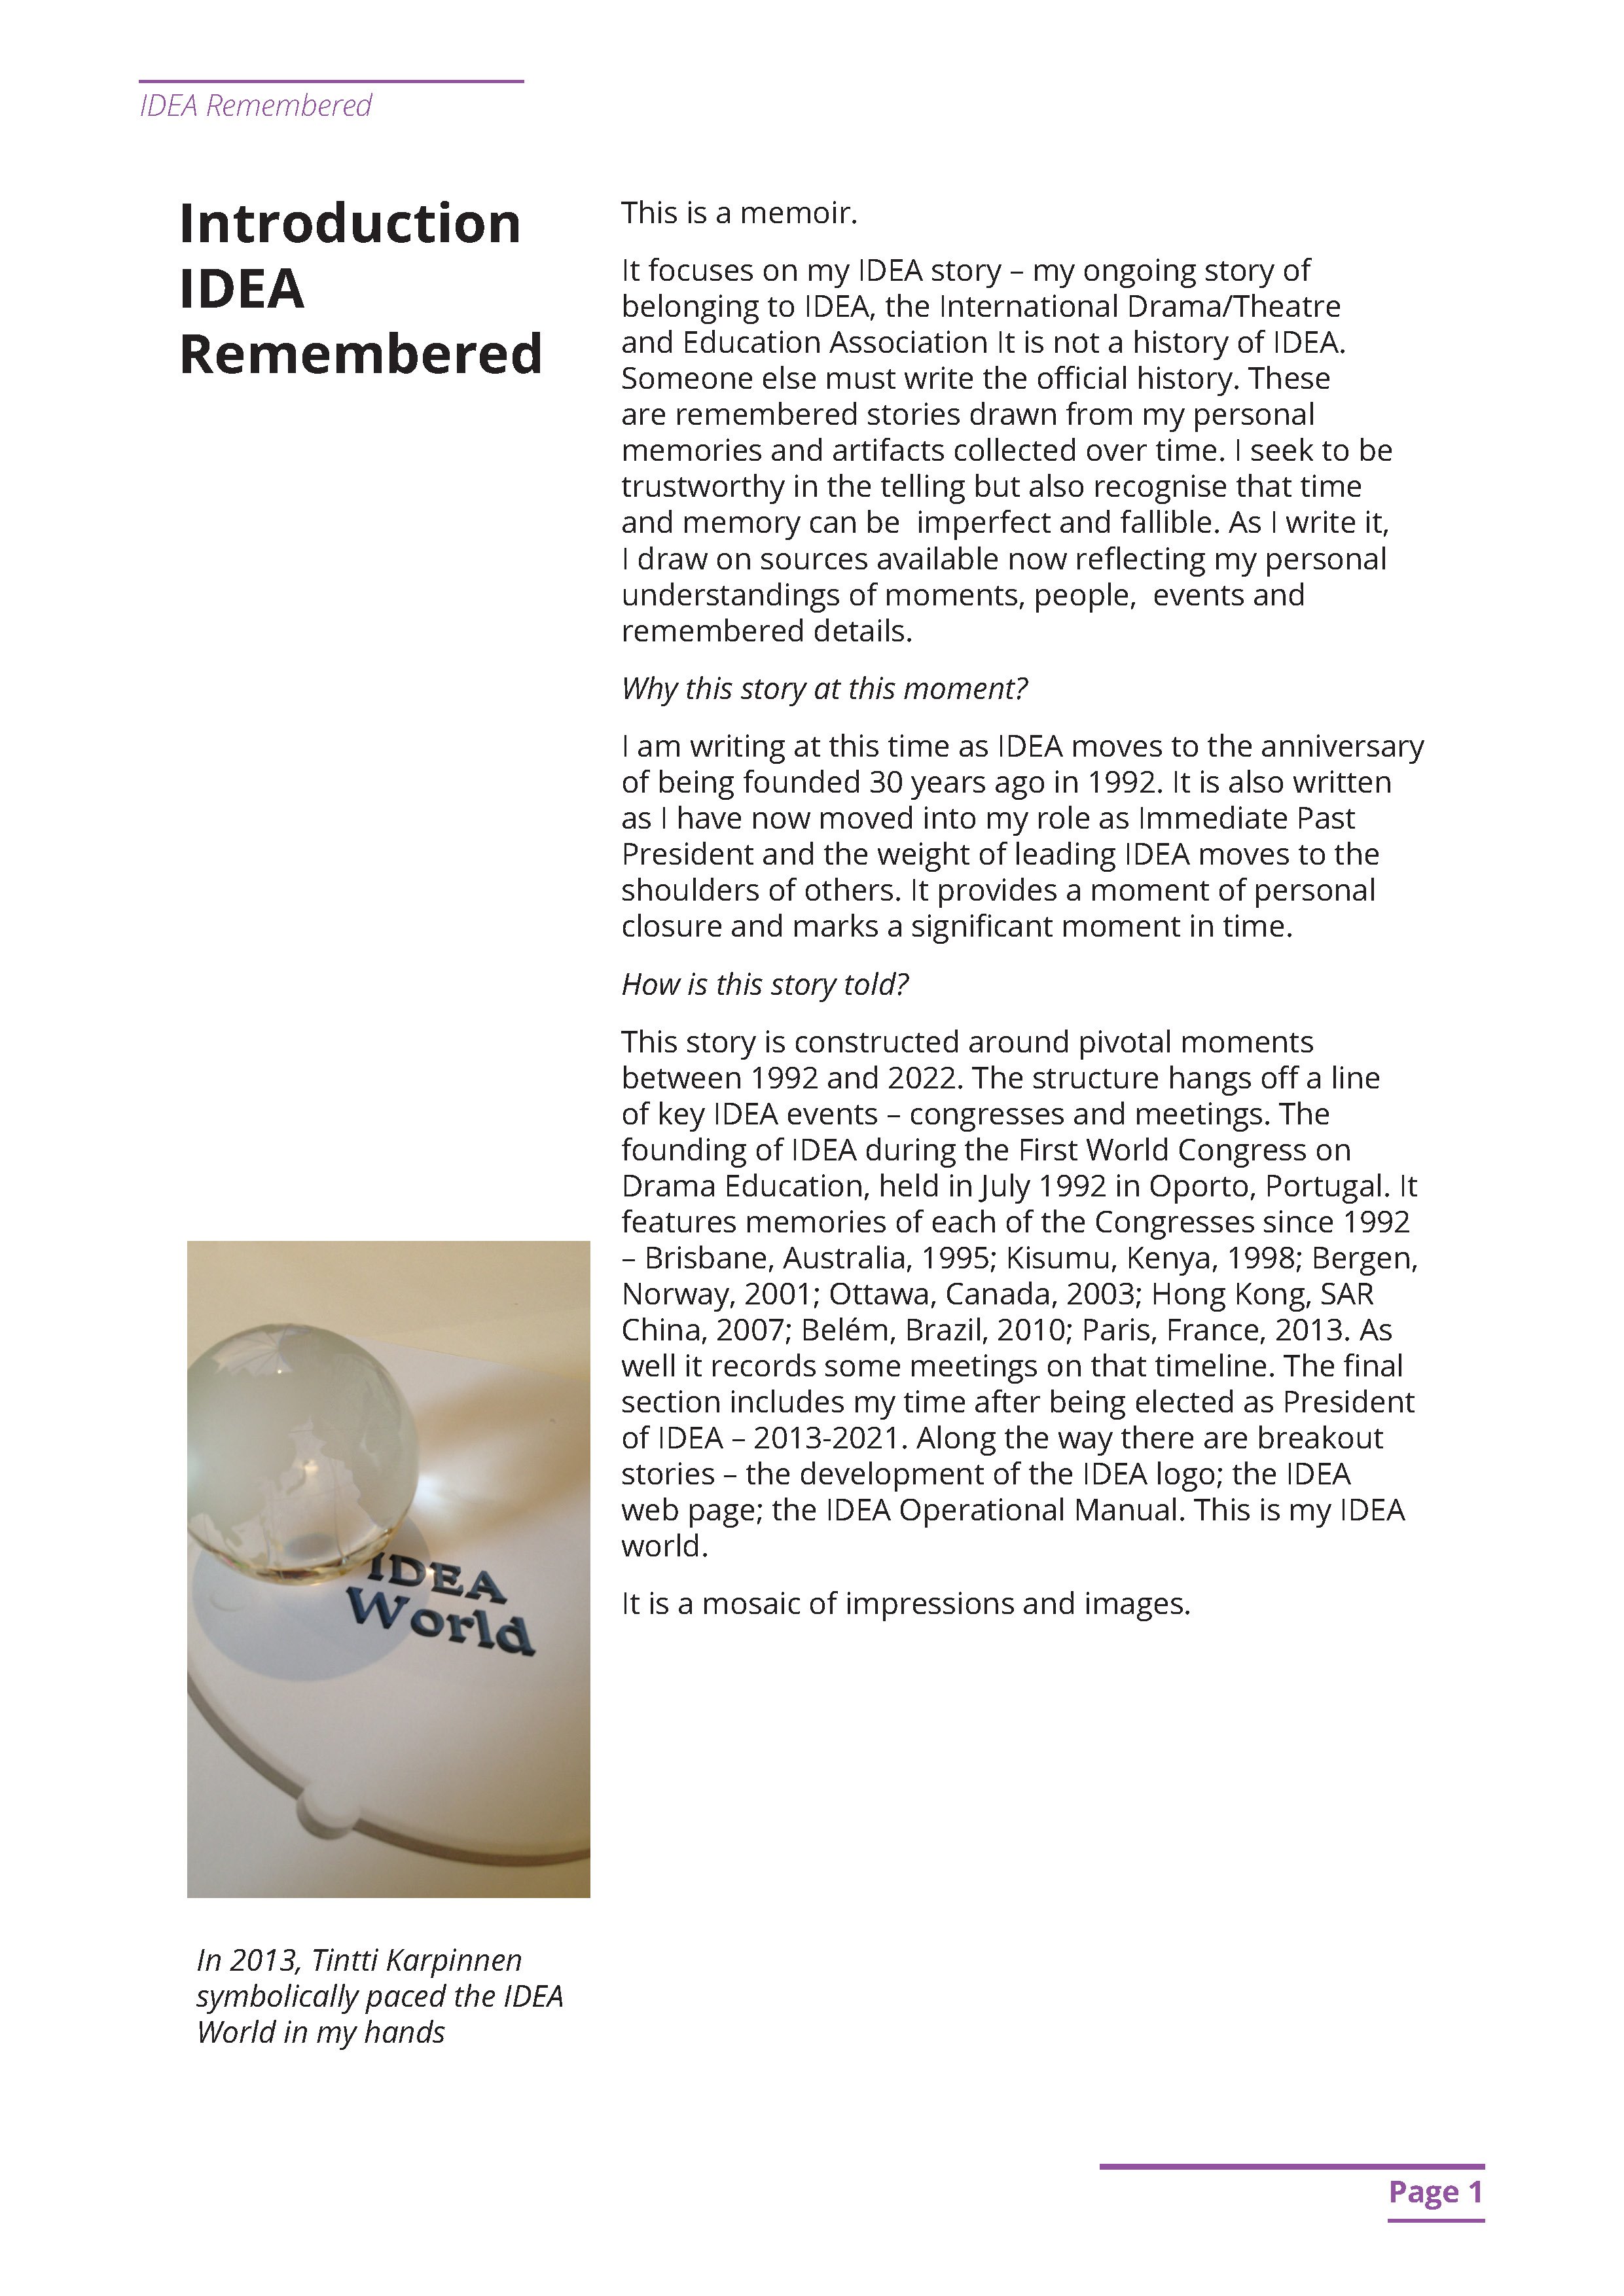 0.IDEA Remembered Introduction Sample Pages _Page_1.jpg